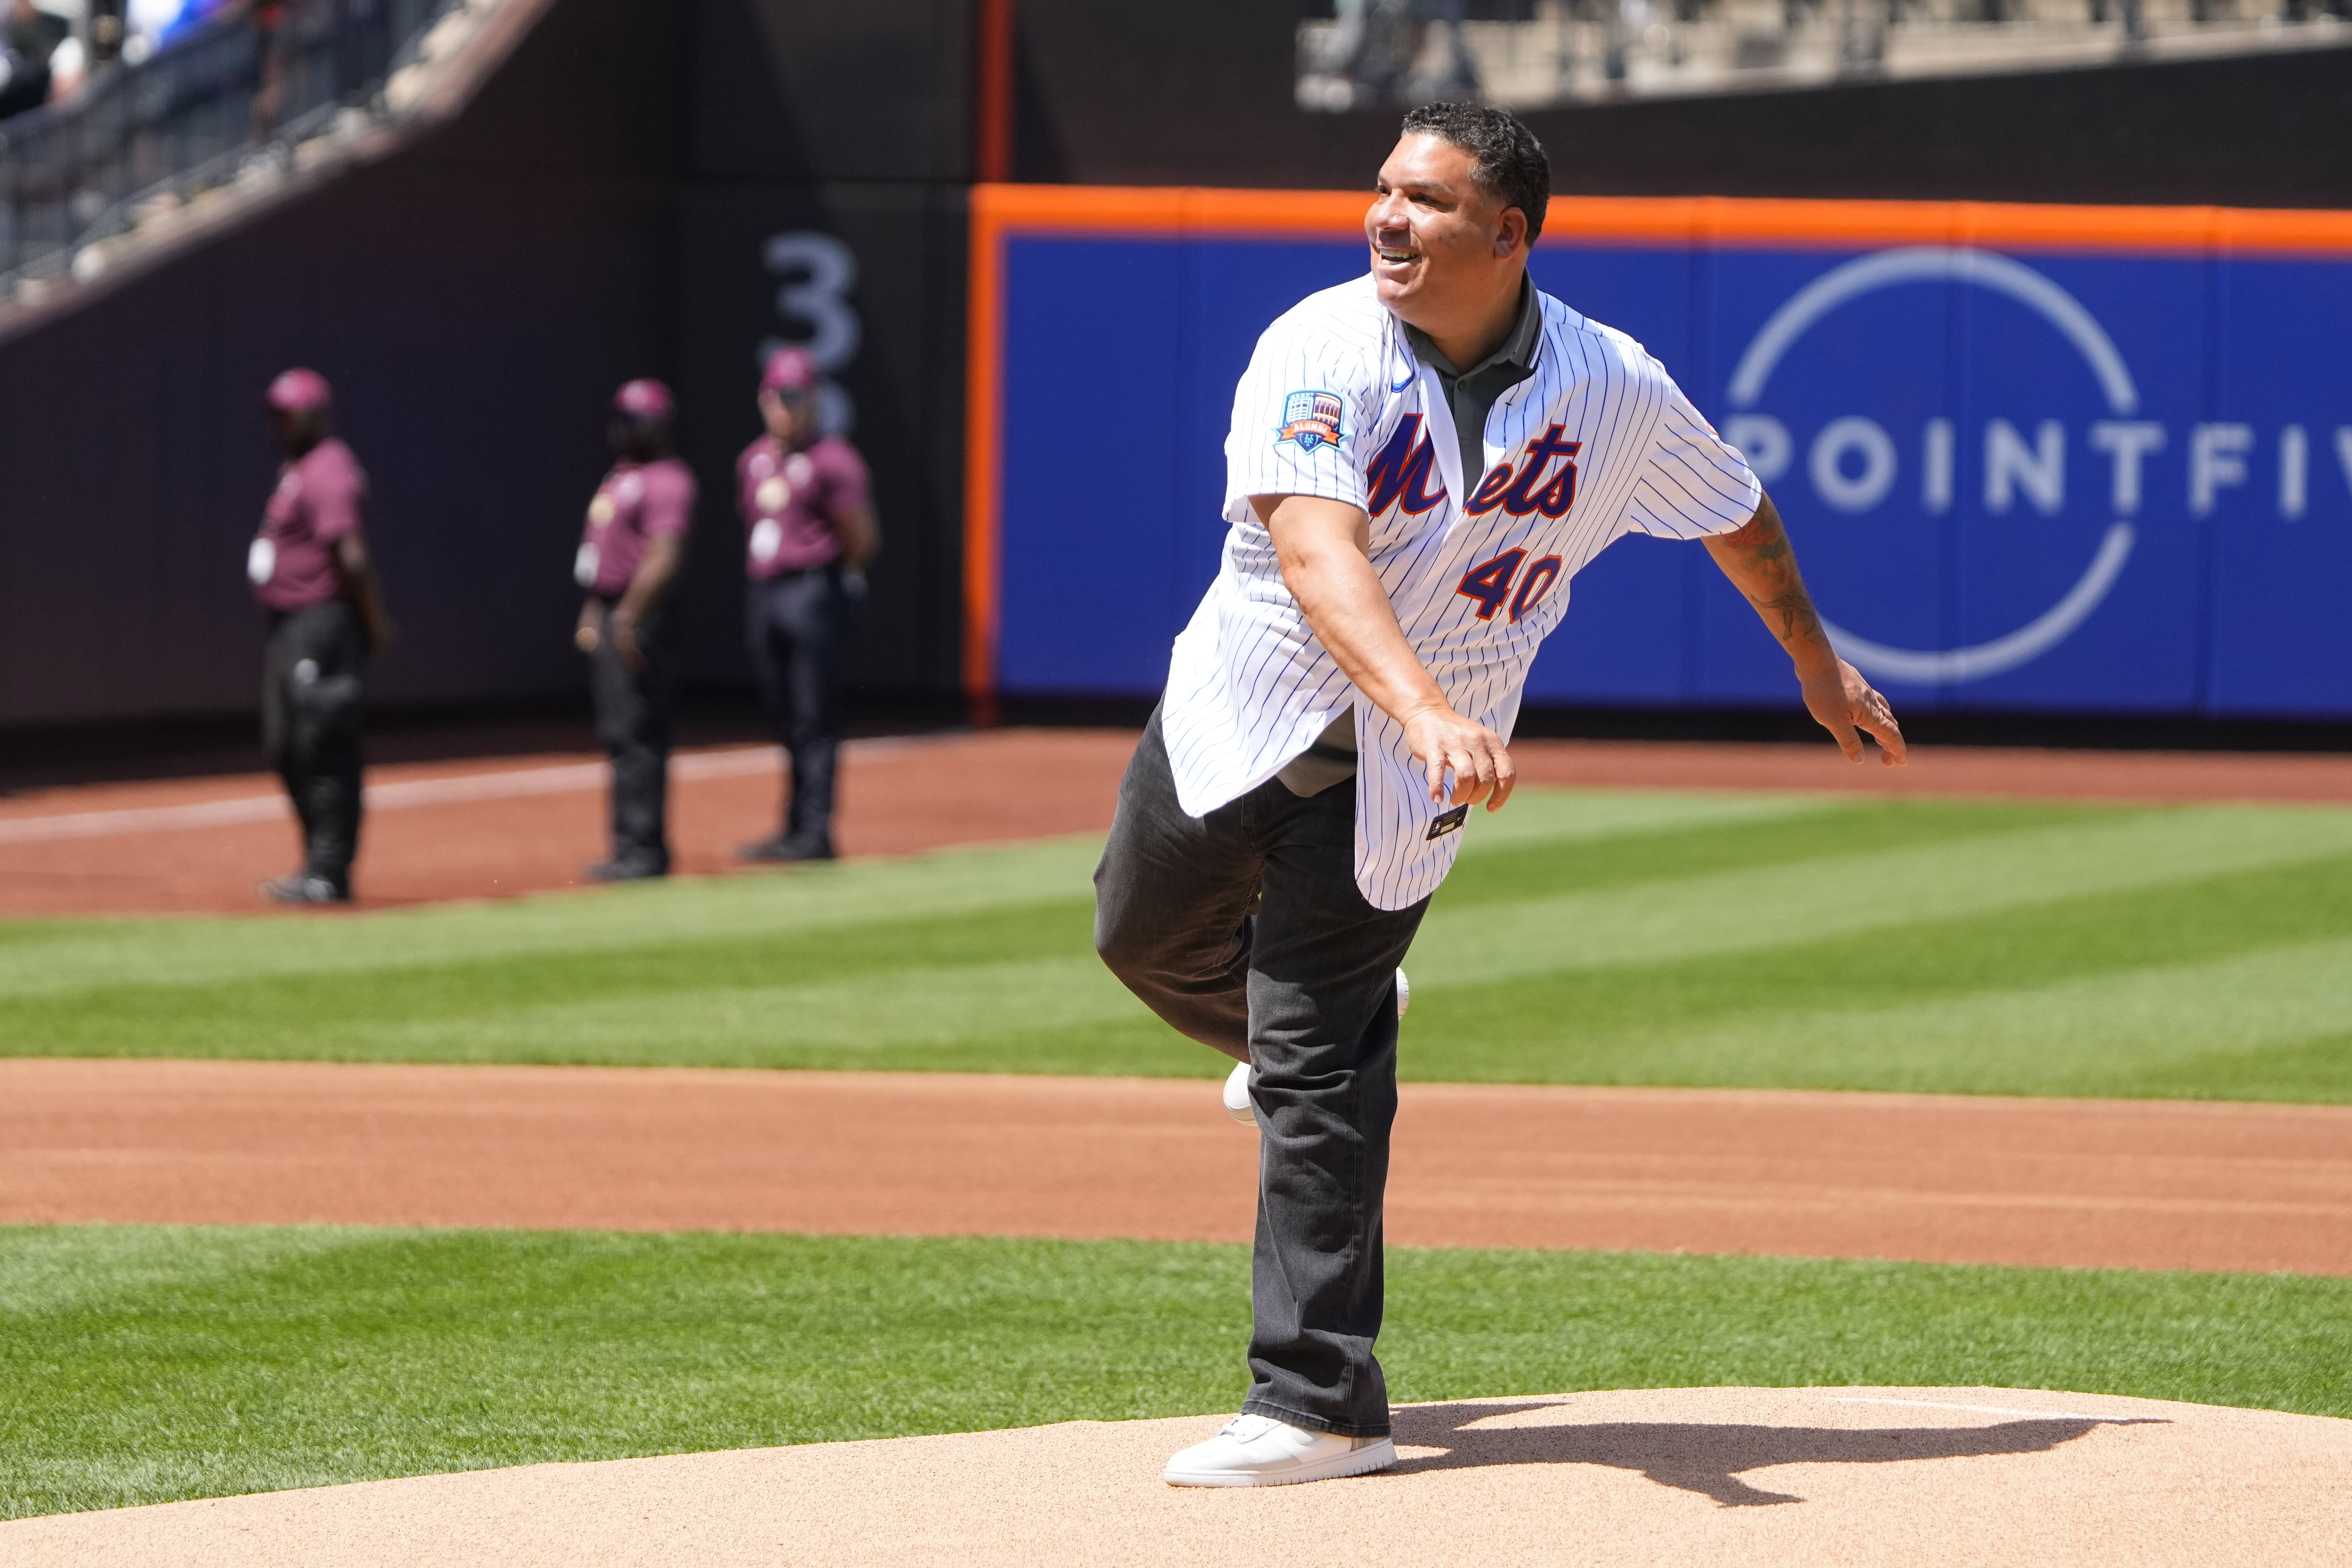 Bart's homer: Colon marks unexpected blast with first pitch